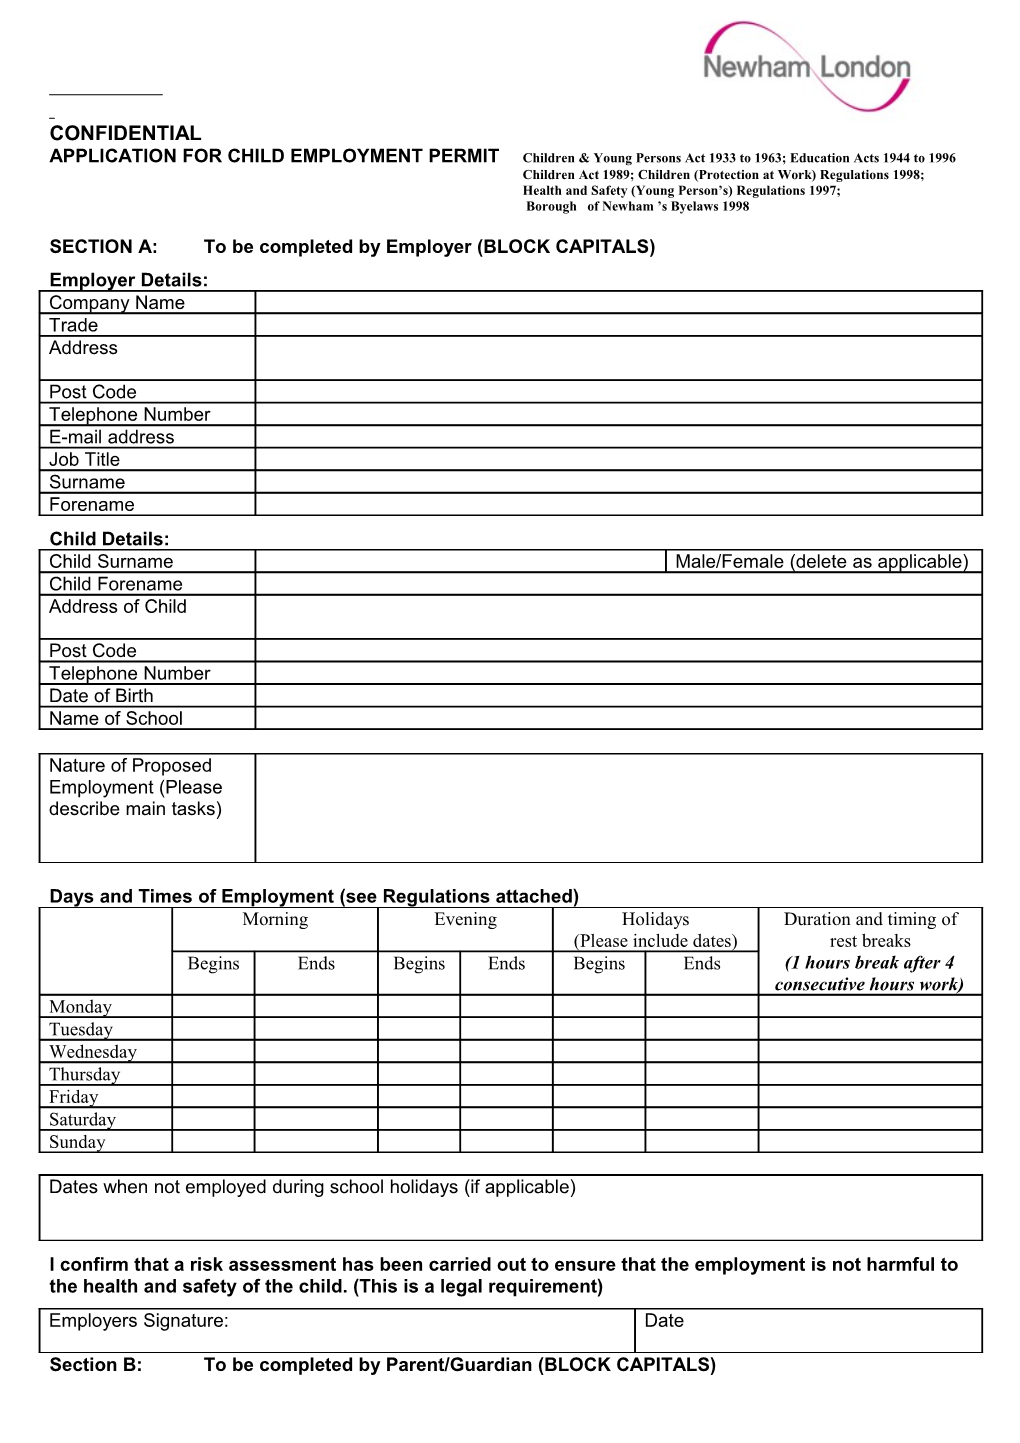 Application for a Child Employment Permit